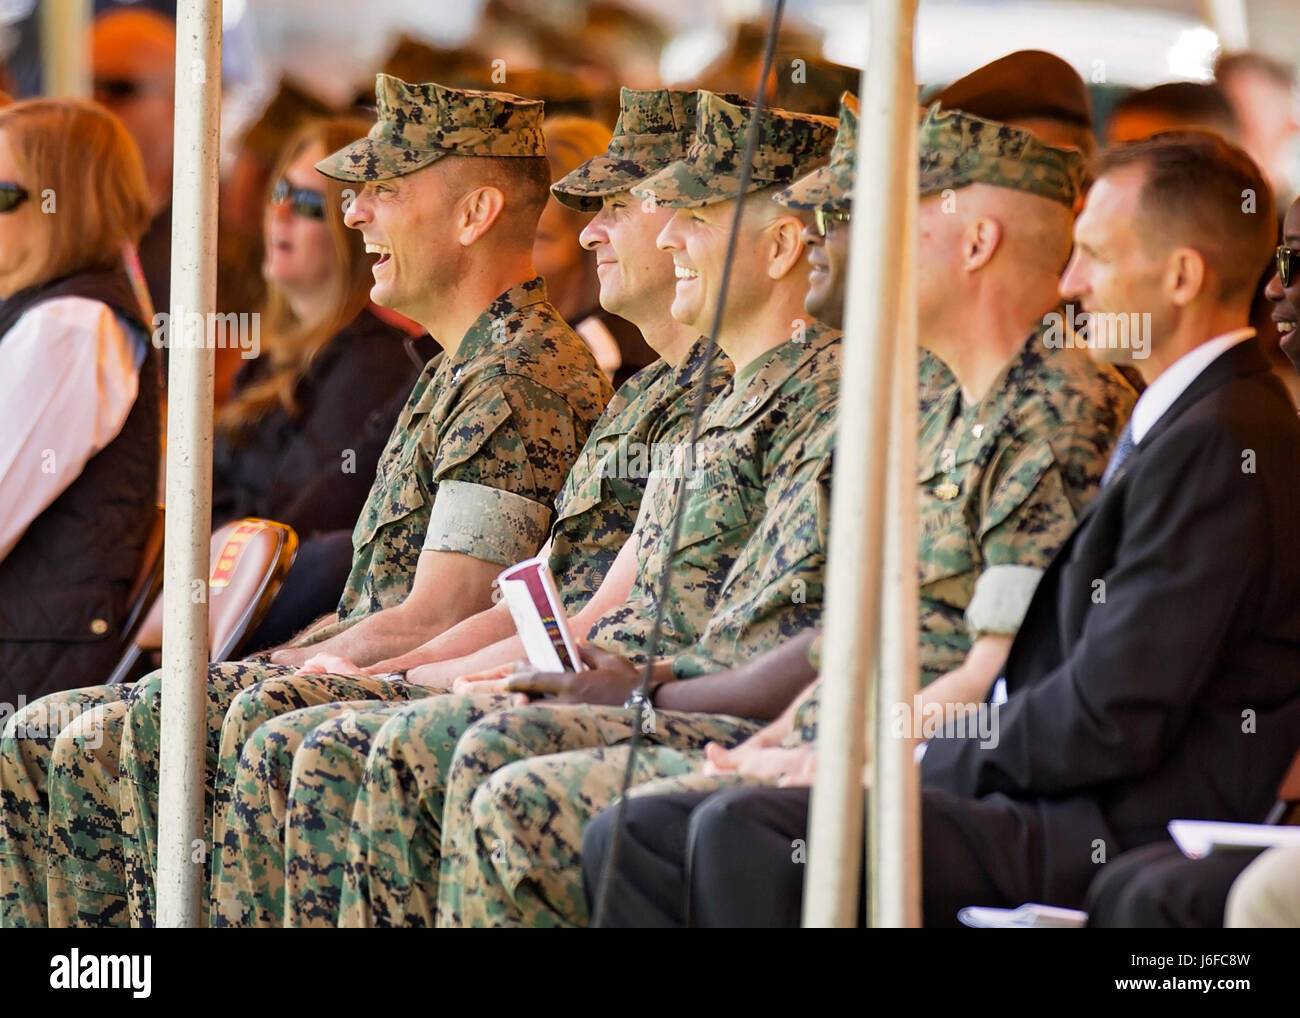 Attendees watch the Centennial Celebration Ceremony at Lejeune Field, Marine Corps Base (MCB) Quantico, Va., May 10, 2017. The event commemorates the founding of MCB Quantico in 1917, and consisted of performances by the U.S. Marine Corps Silent Drill Platoon and the U.S. Marine Drum & Bugle Corps. (U.S. Marine Corps photo by James H. Frank) Stock Photo